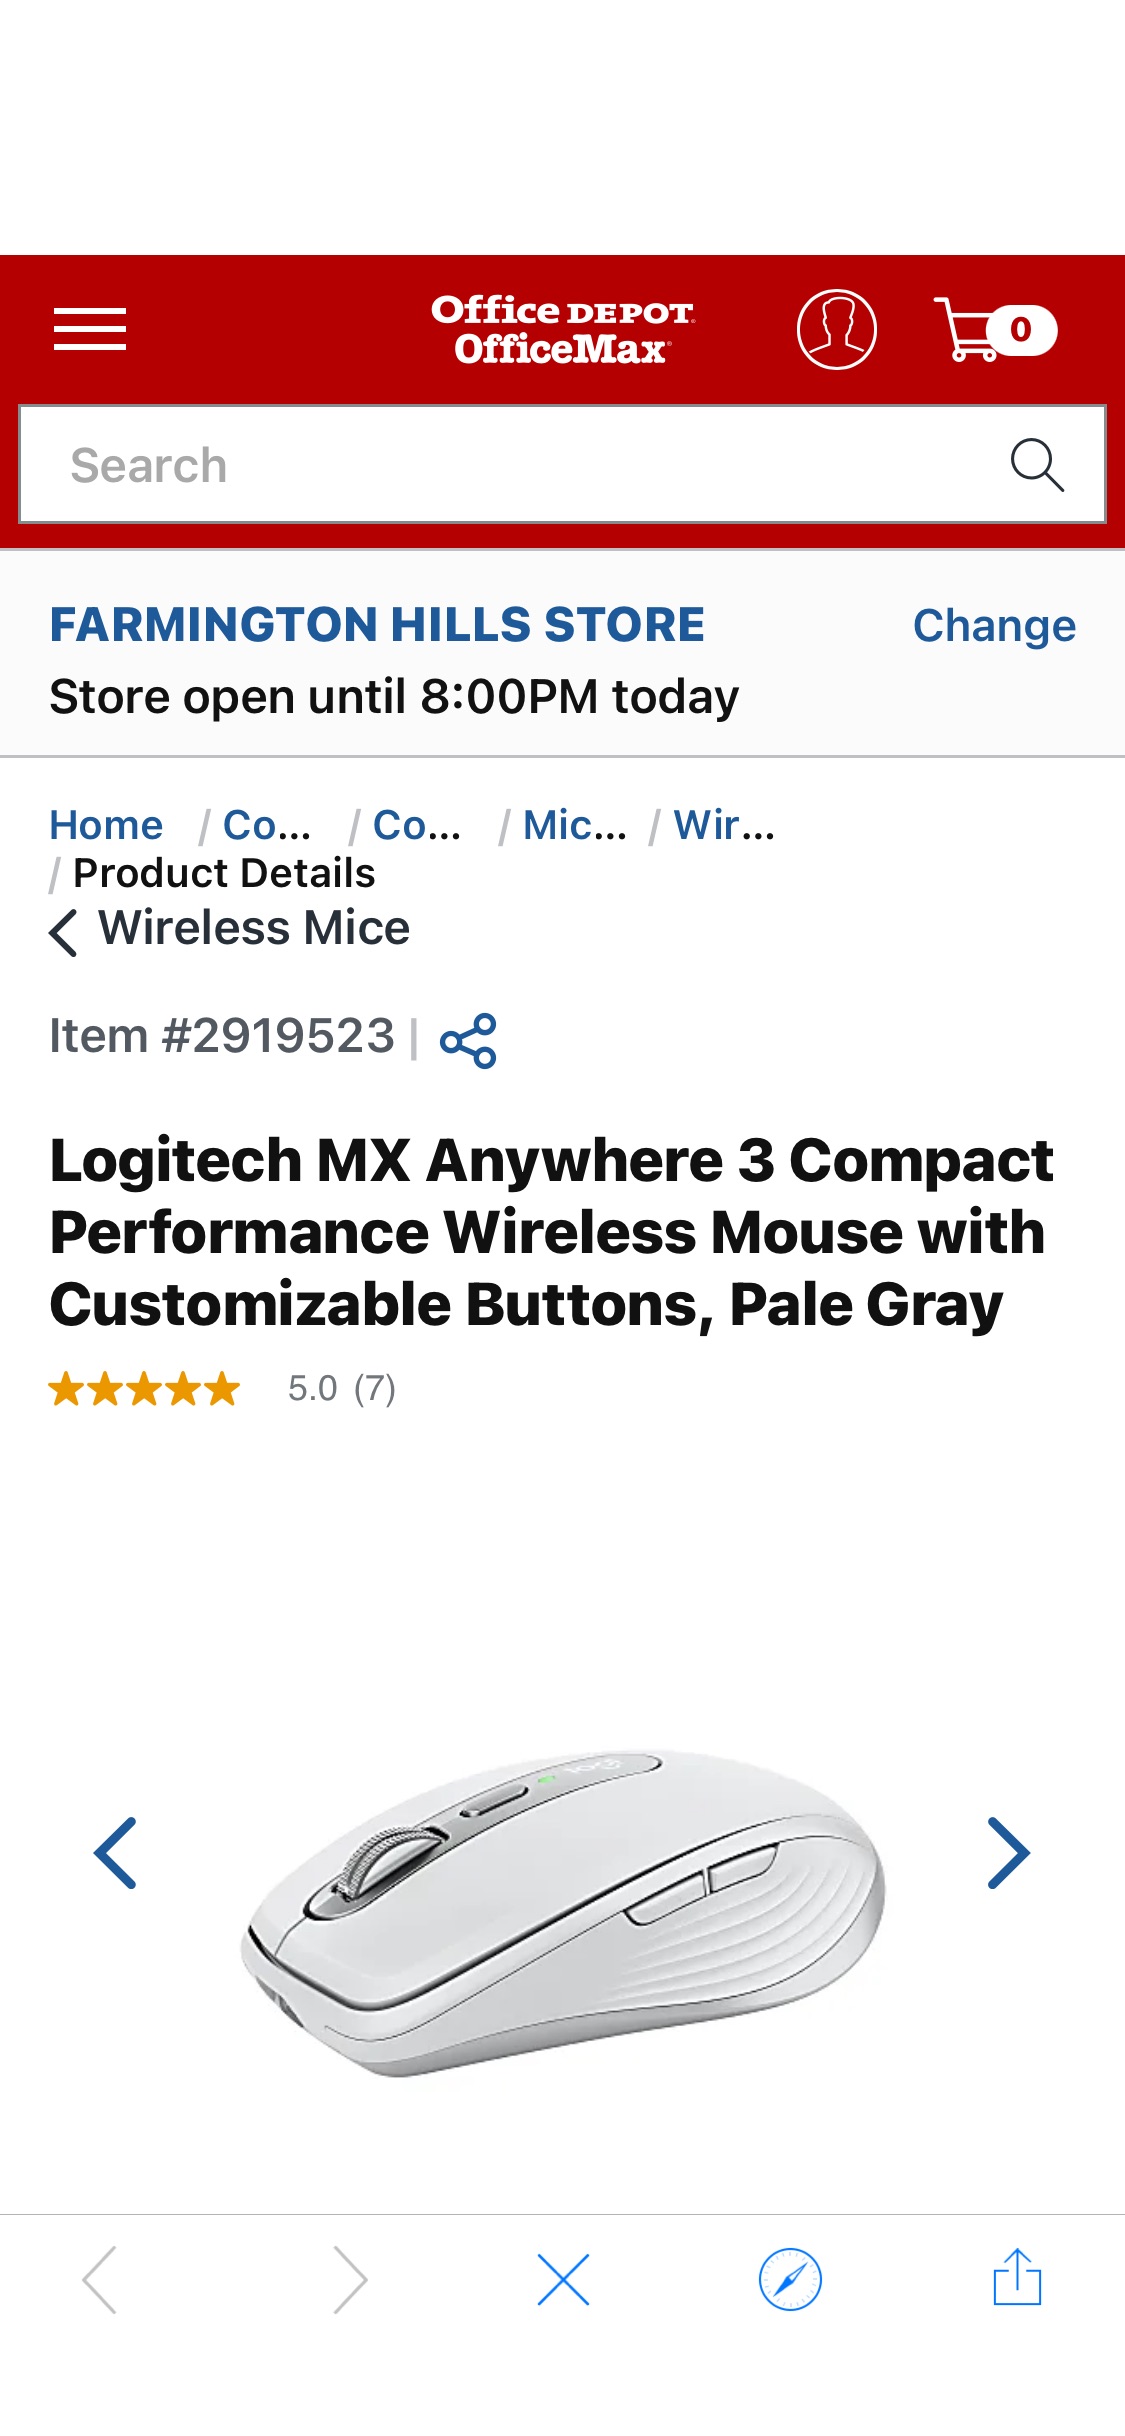 Logitech MX Anywhere 3 Compact Performance Wireless Mouse with Customizable Buttons Pale Gray - Office Depot